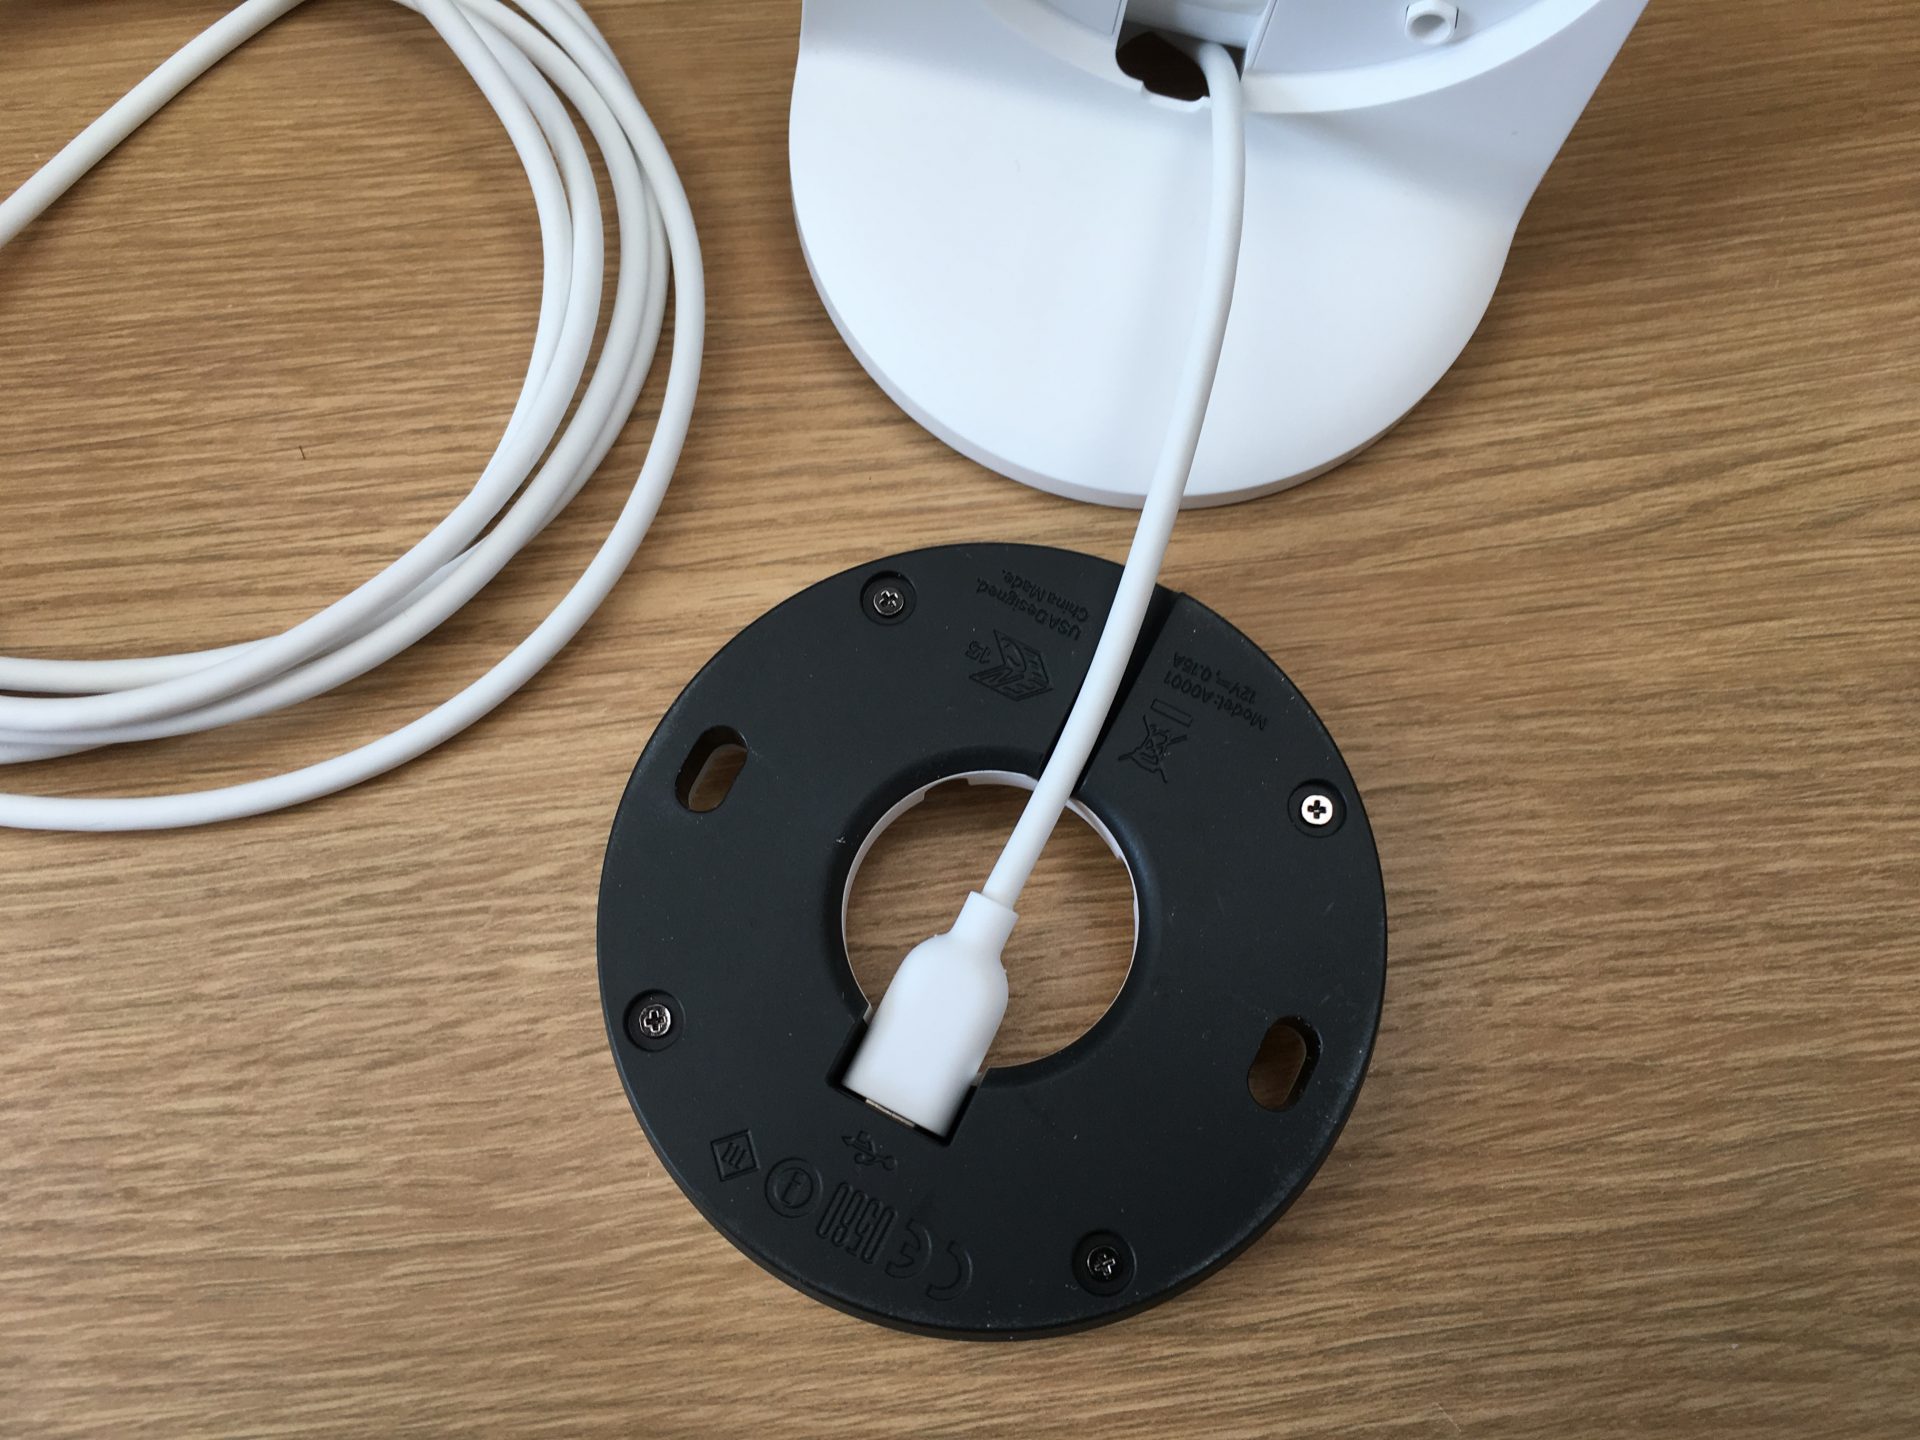 Connect Nest Base to USB cable